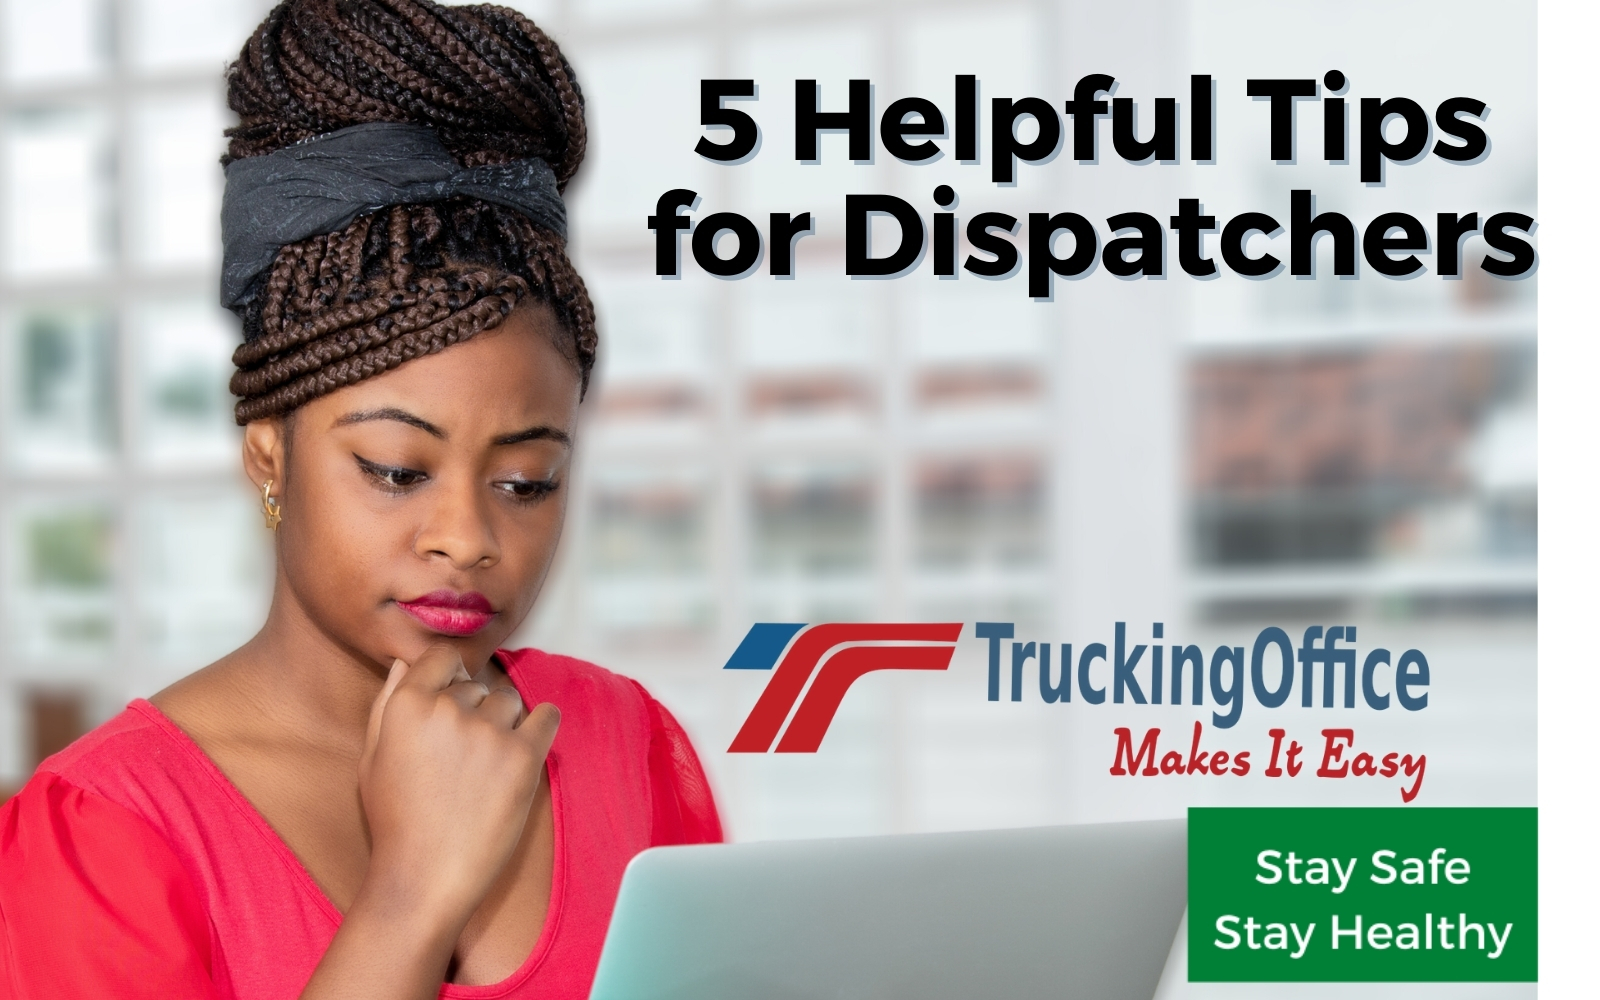 5 Helpful Tips for Dispatchers